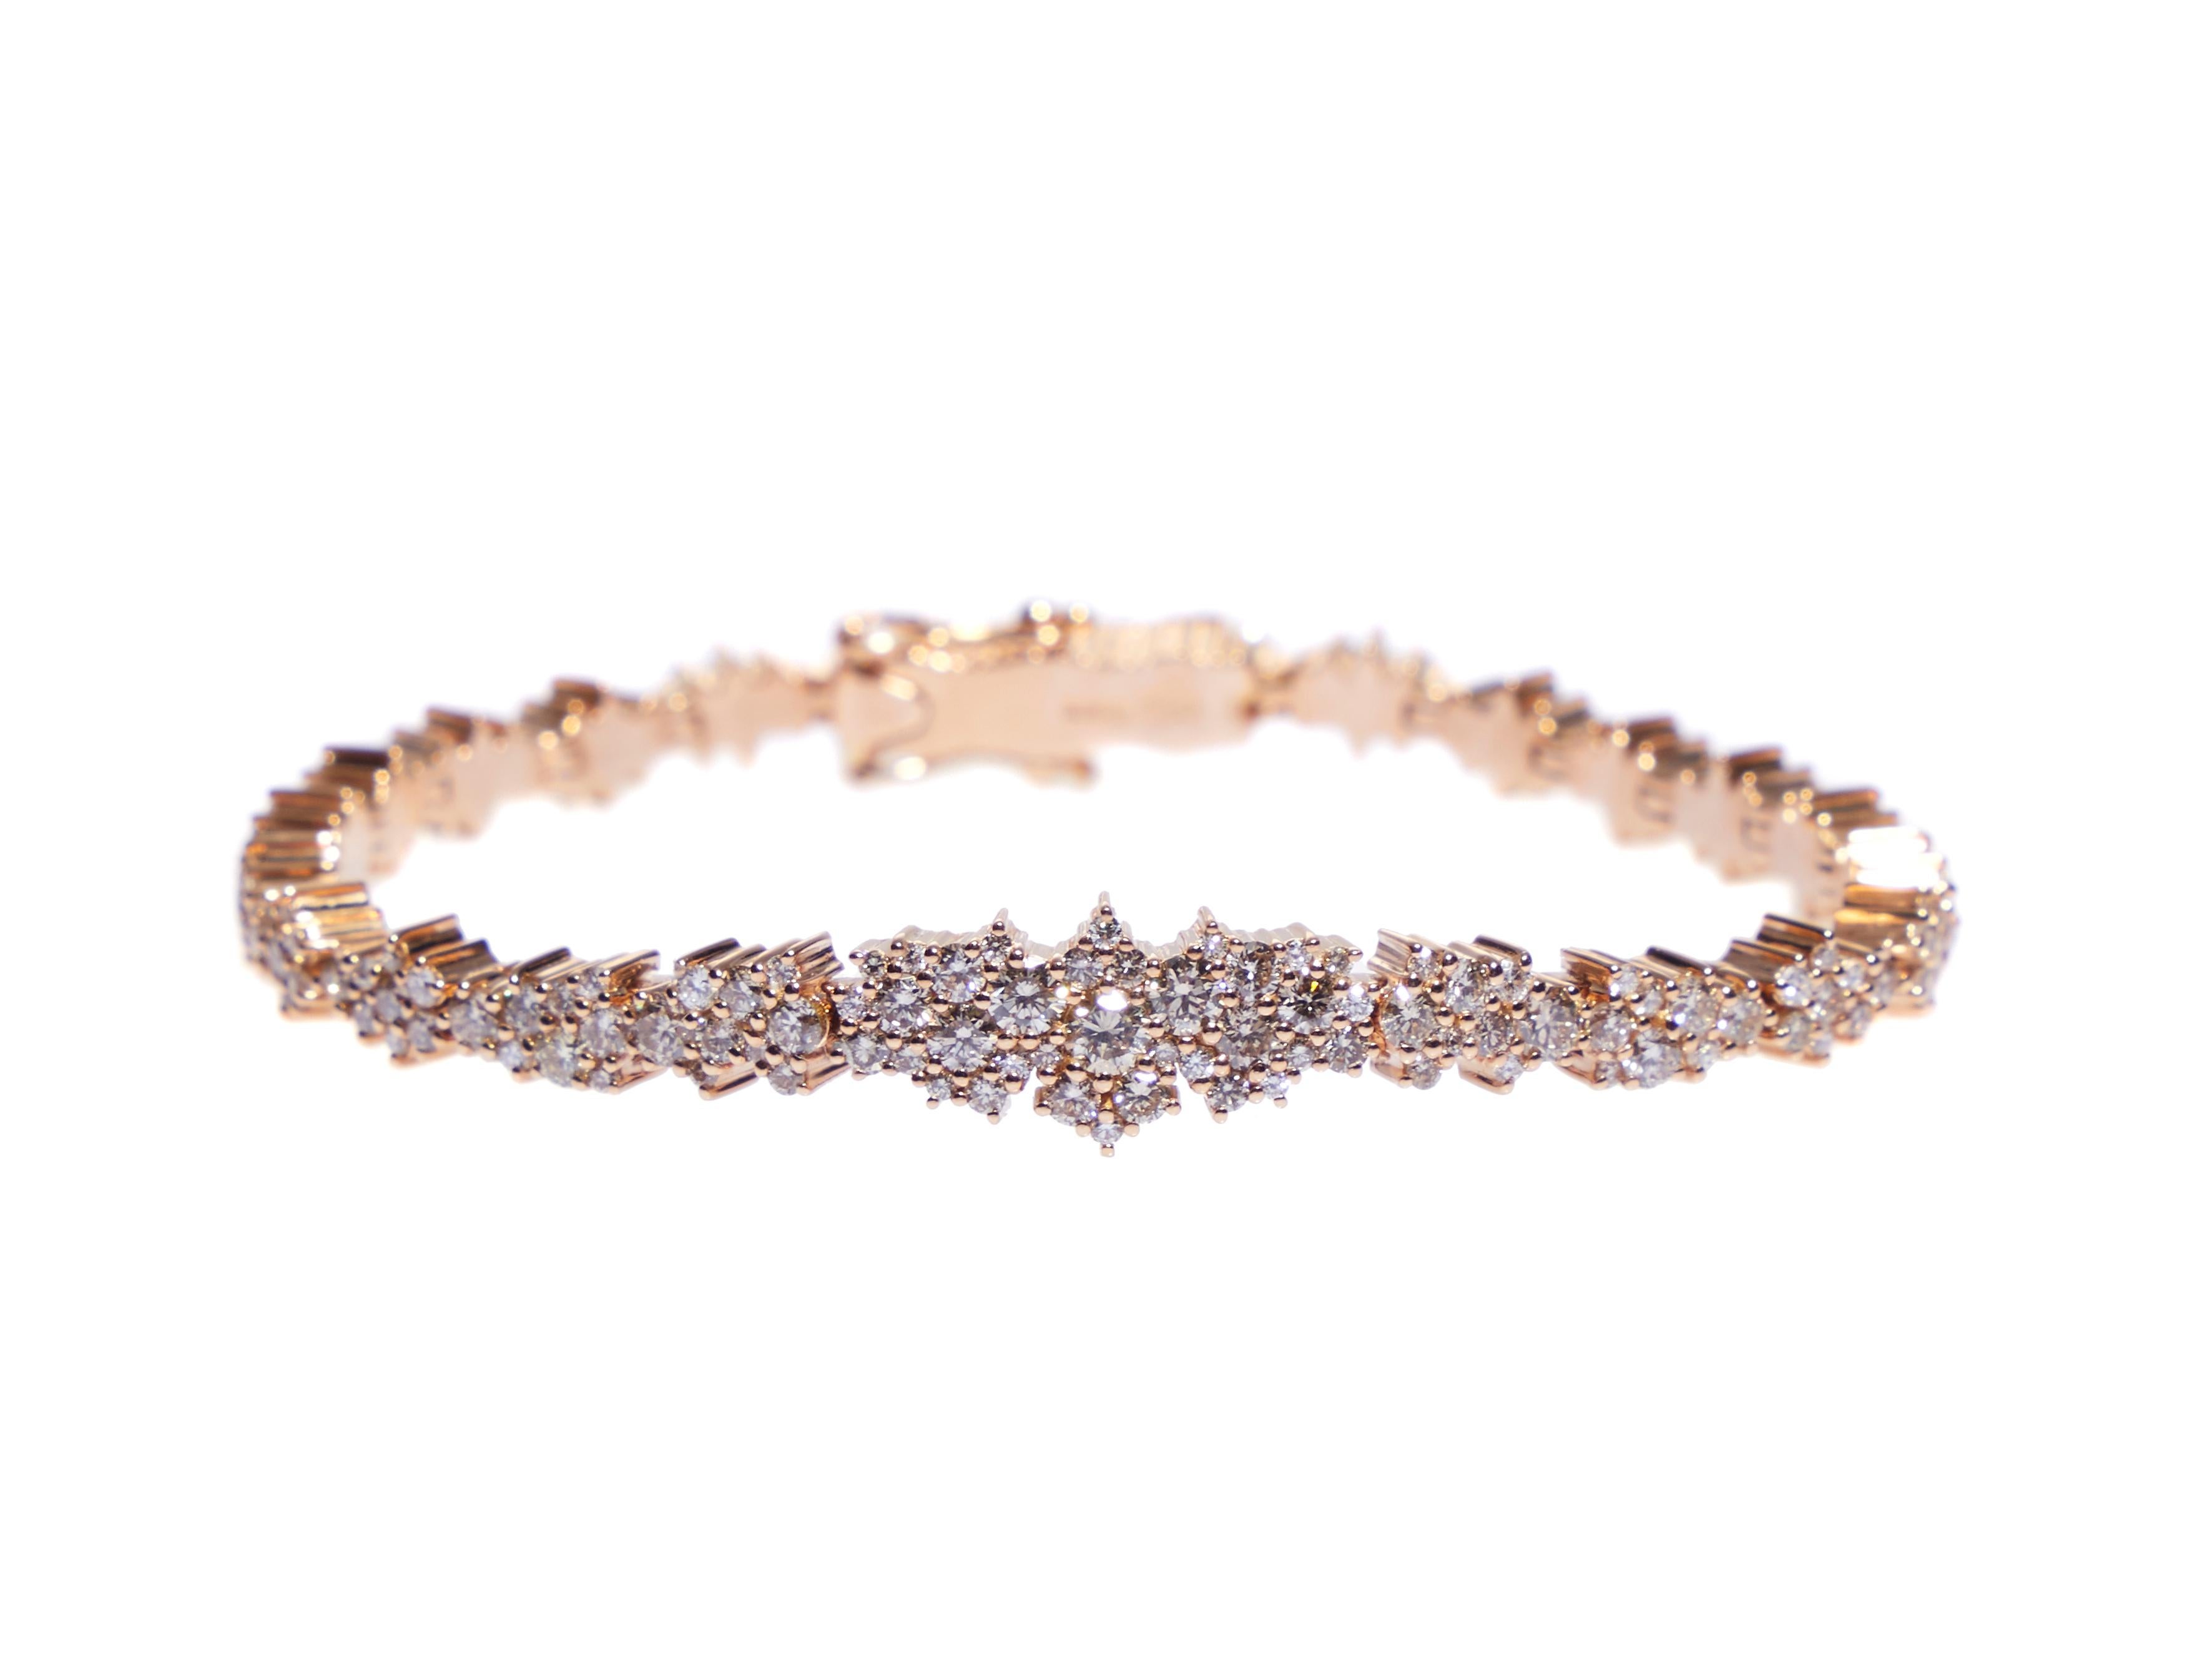 This 18 karat rose gold bracelet features round brilliant cut white diamonds, round cut brown diamonds in a unique prong setting. A modern take on a classic diamond 
tennis bracelet. 

The total diamond weight is 4.06 carats, 3.40 carat brown